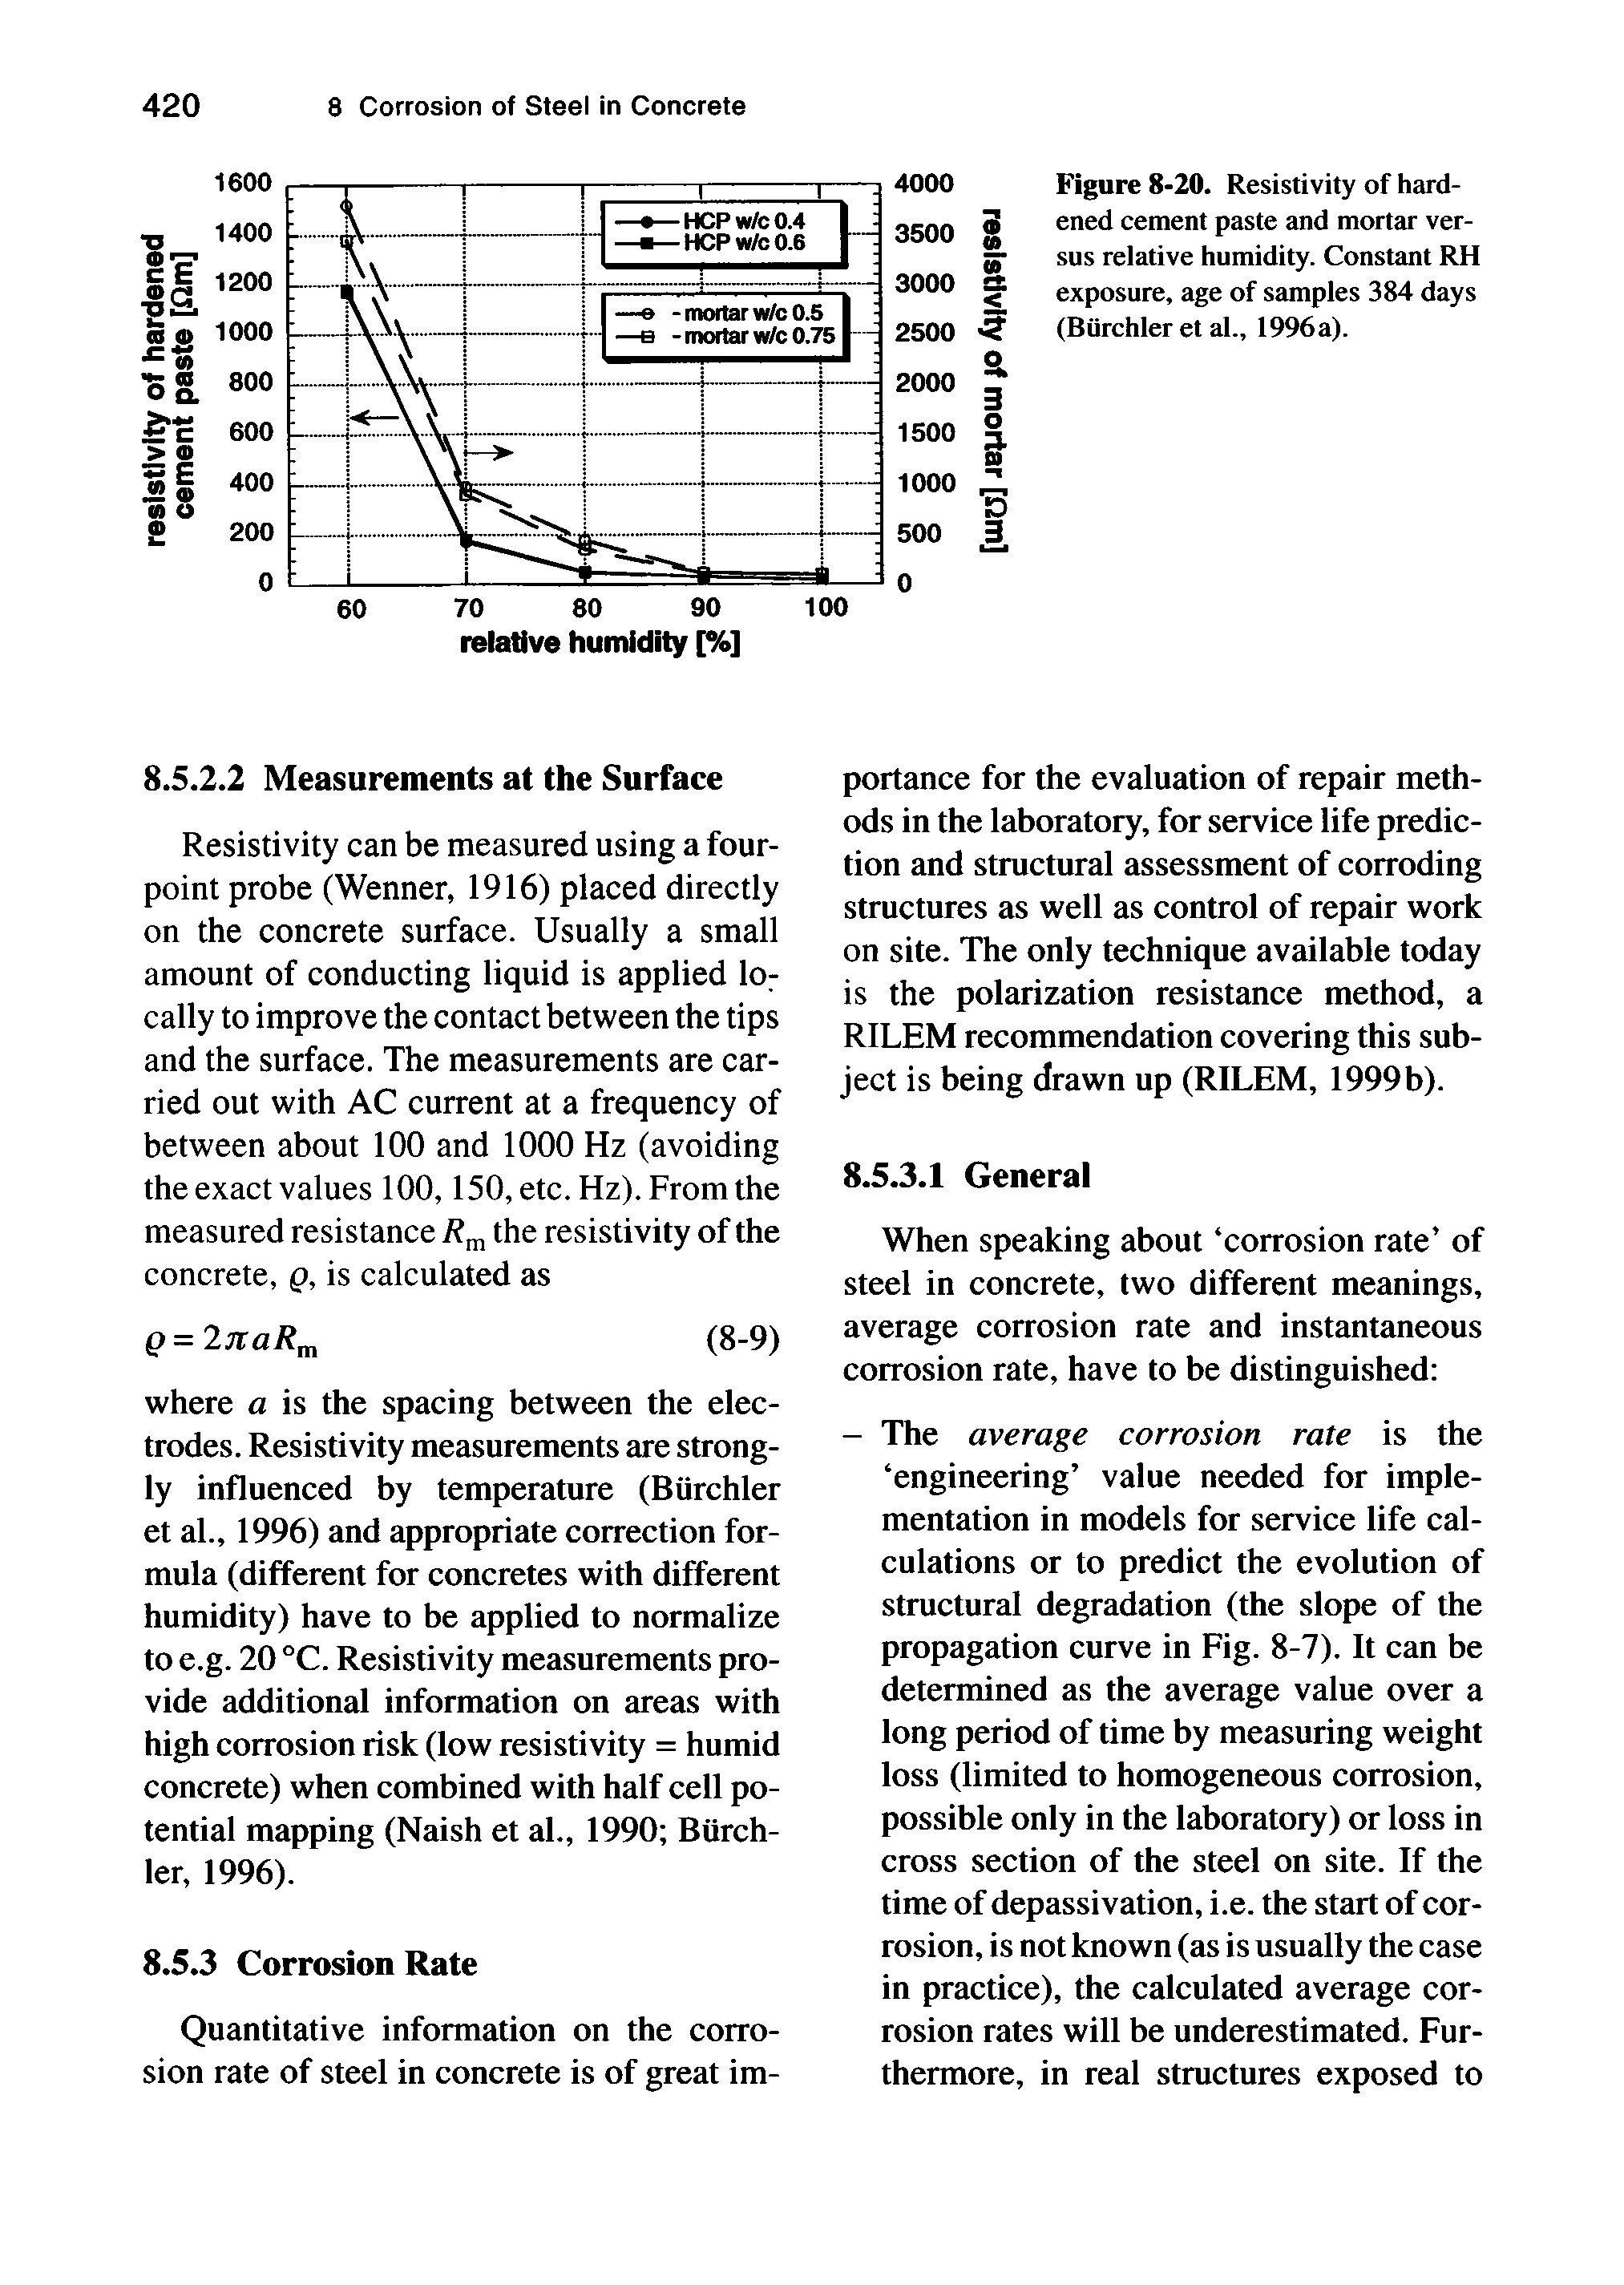 Figure 8-20. Resistivity of hardened cement paste and mortar versus relative humidity. Constant RH exposure, age of samples 384 days (Biirchler et al., 1996a).